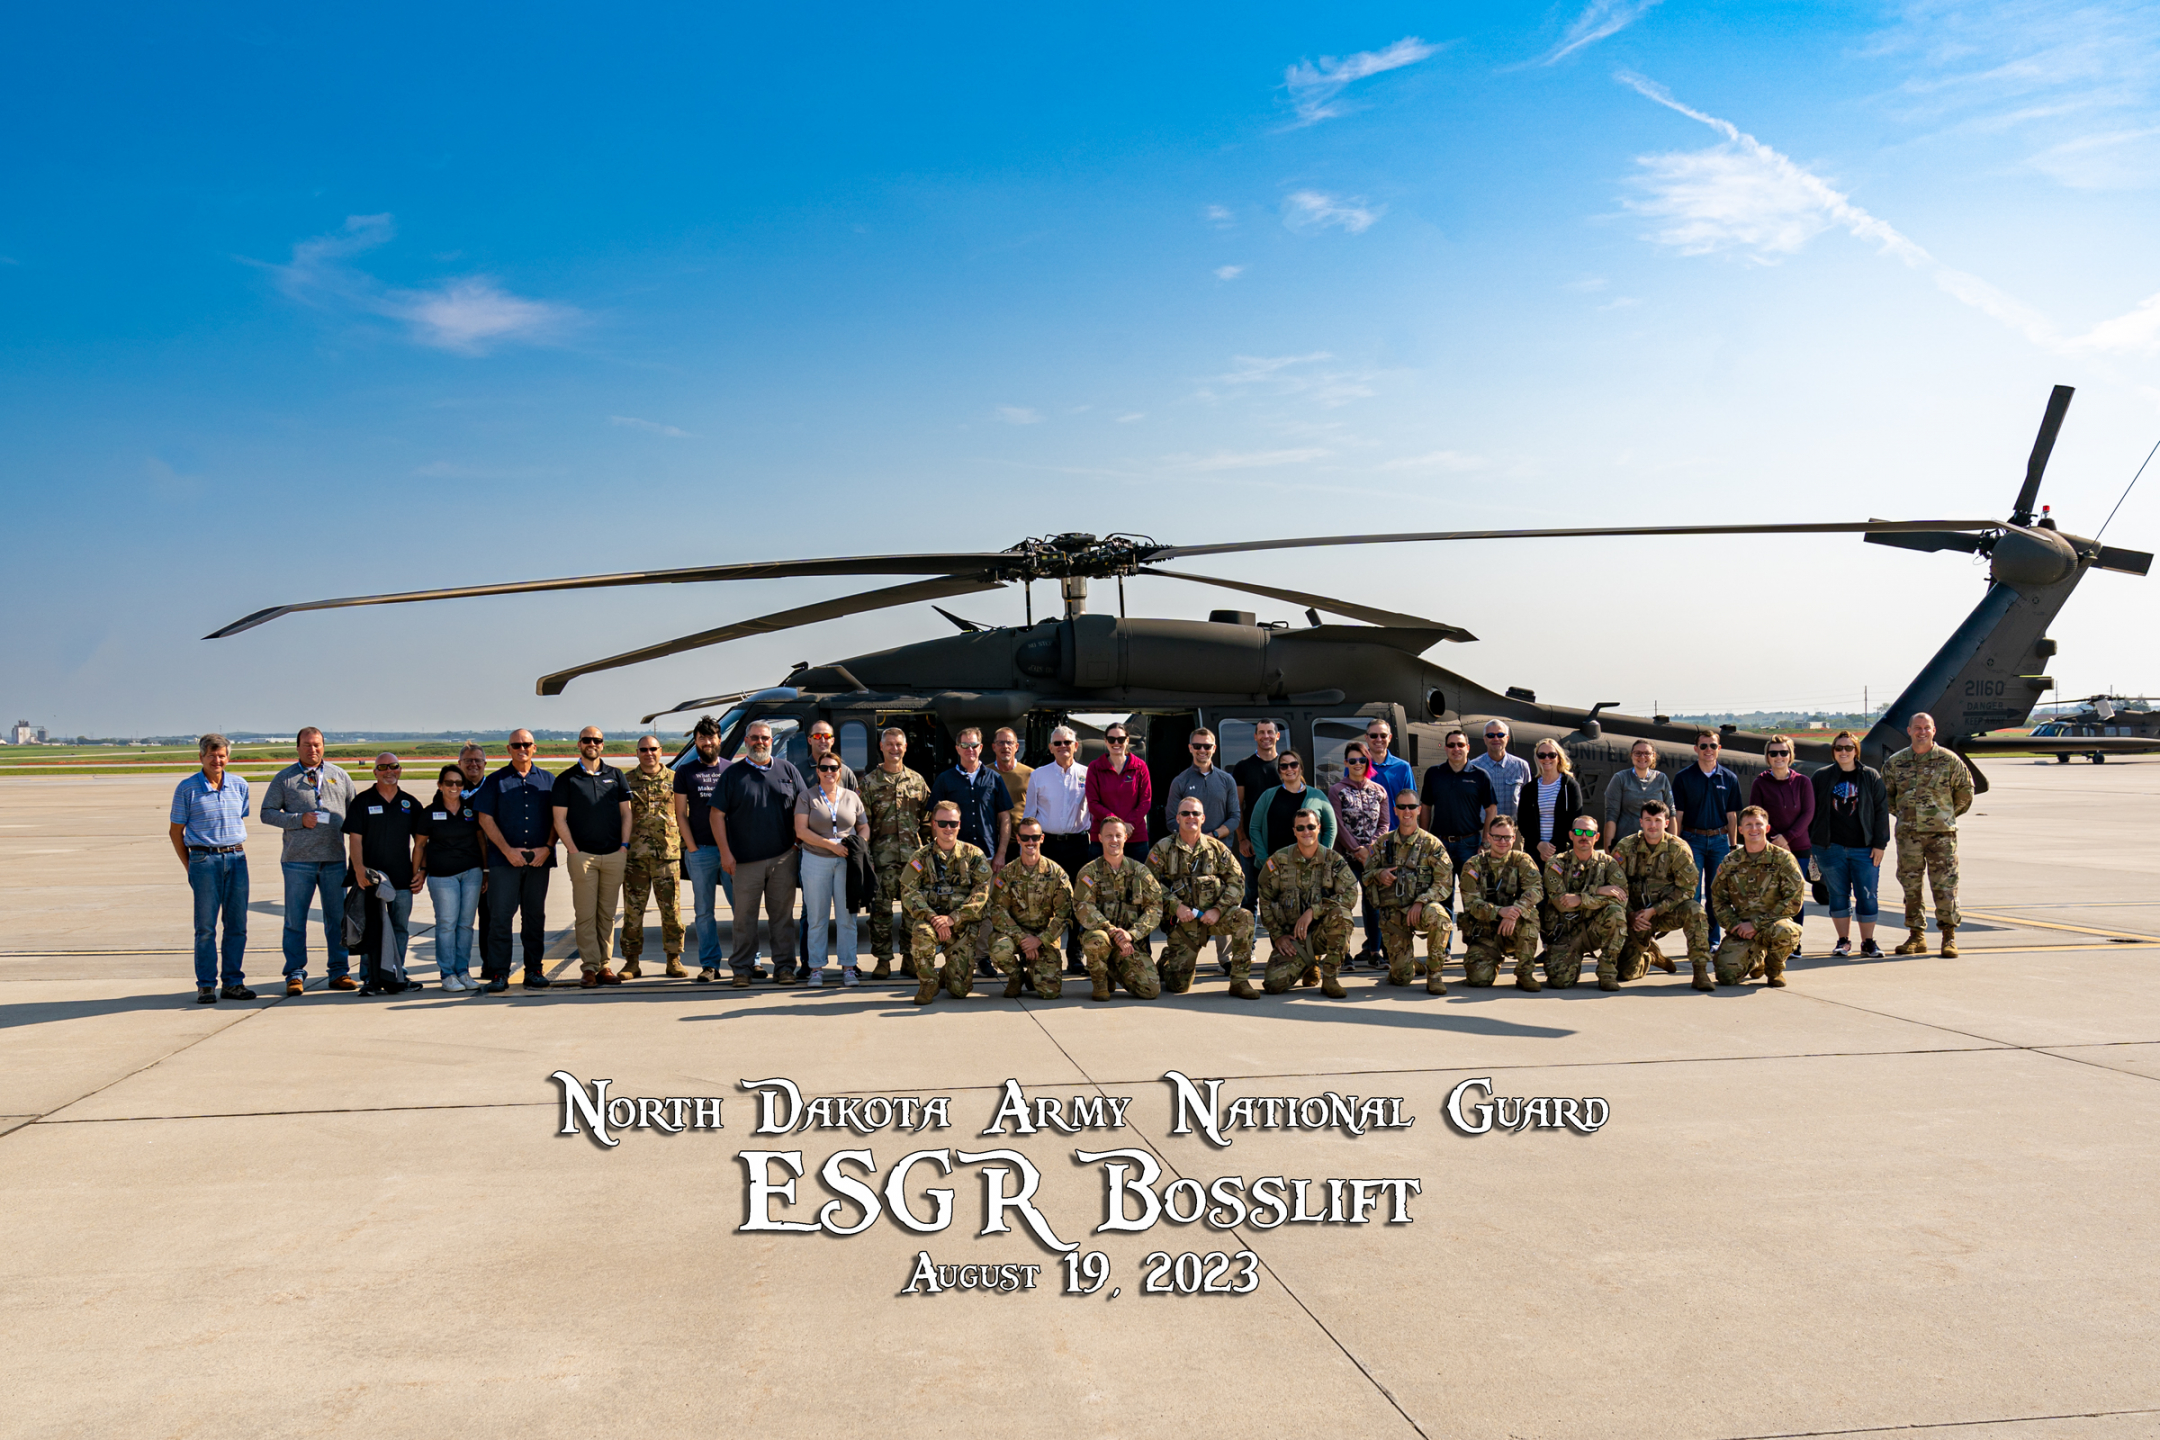 North Dakota Army National Guard ESGR Bosslift 2023 group photo in front of a Helicopter